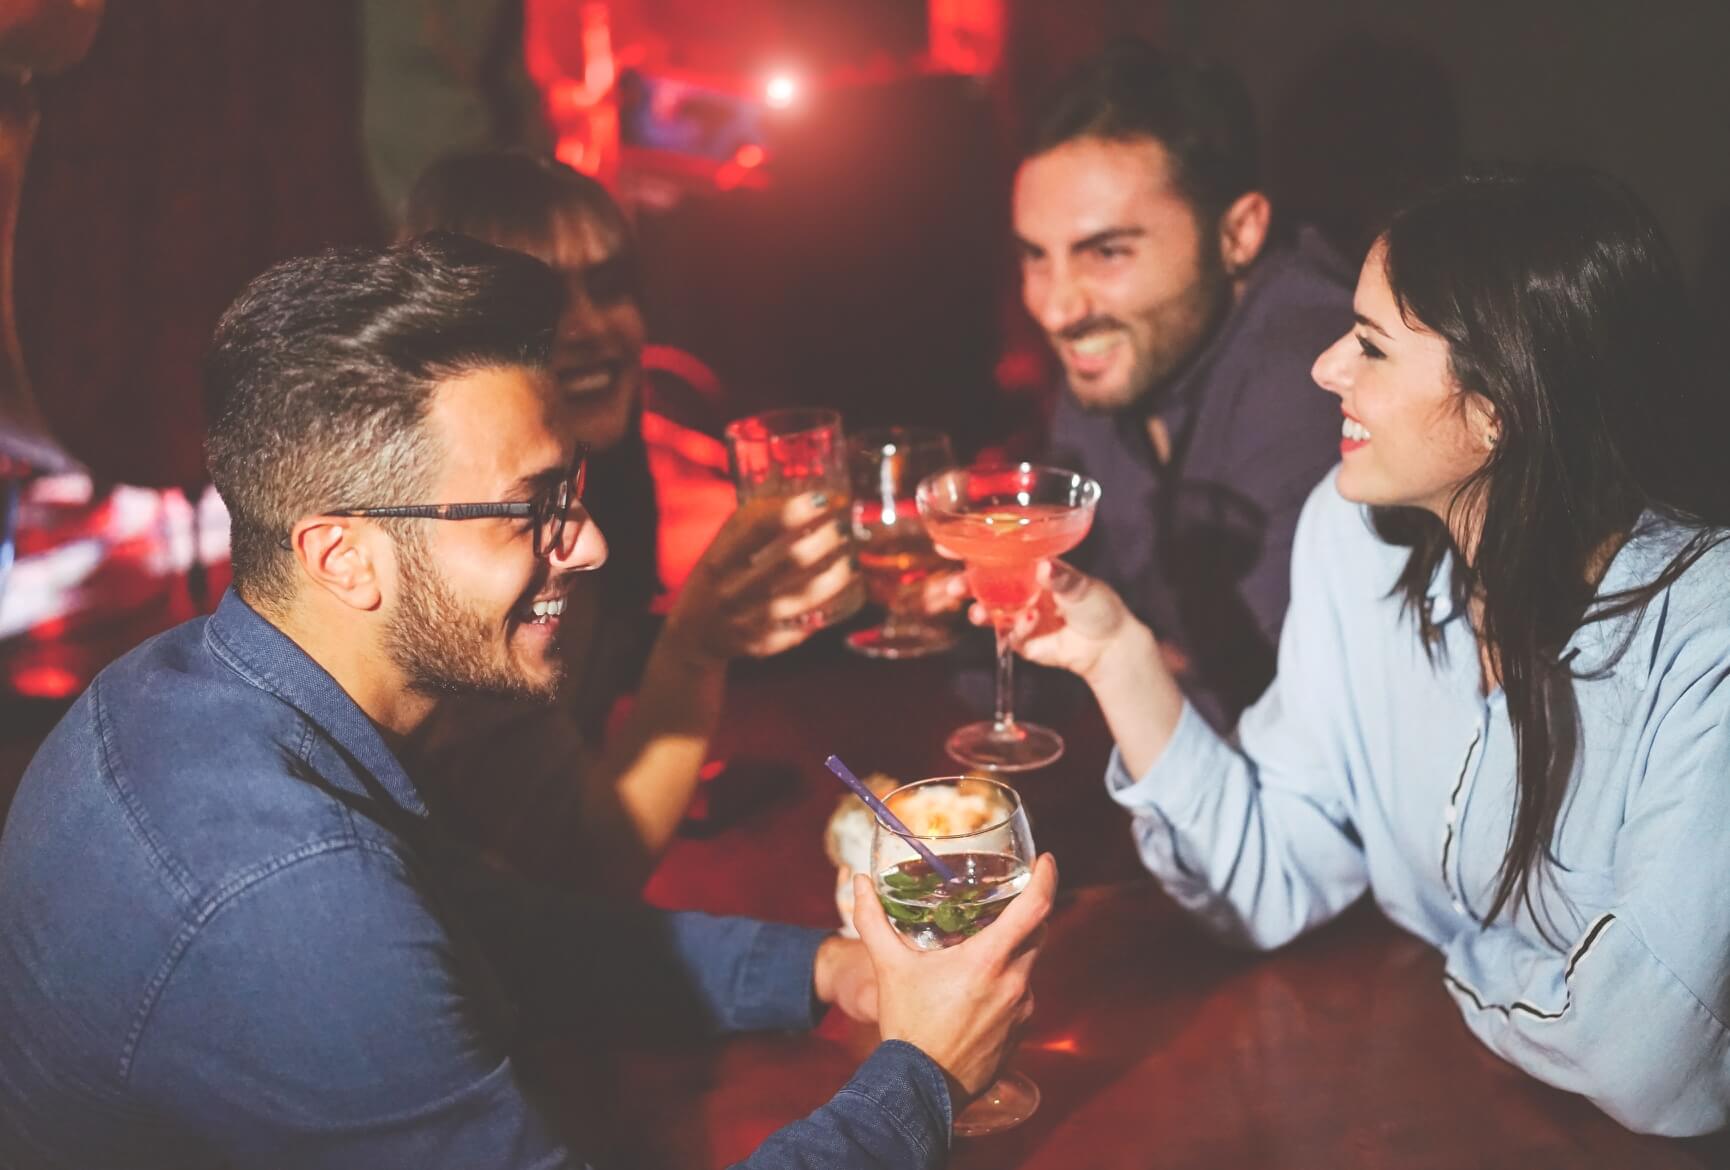 Photo with people enjoying their drinks in a club